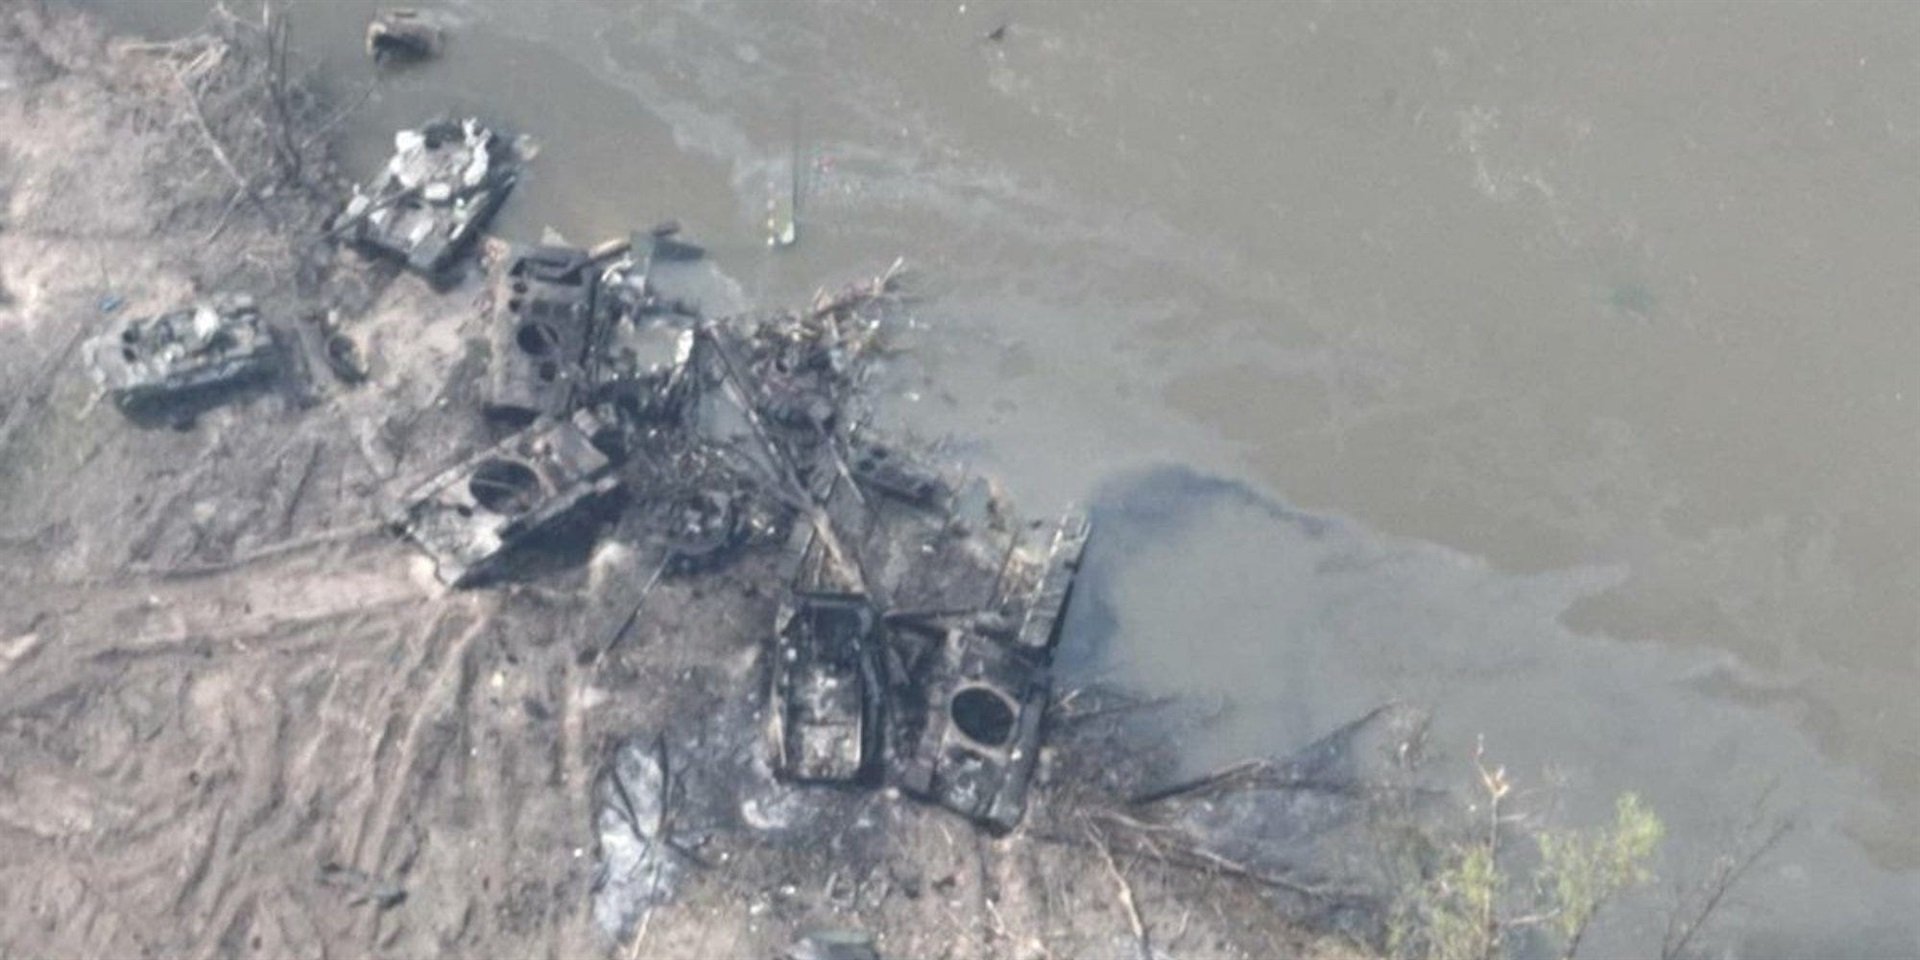 An image shared by Ukraine's defense department, which it says shows destroyed Russian equipment in the Siverskyi Donets River.